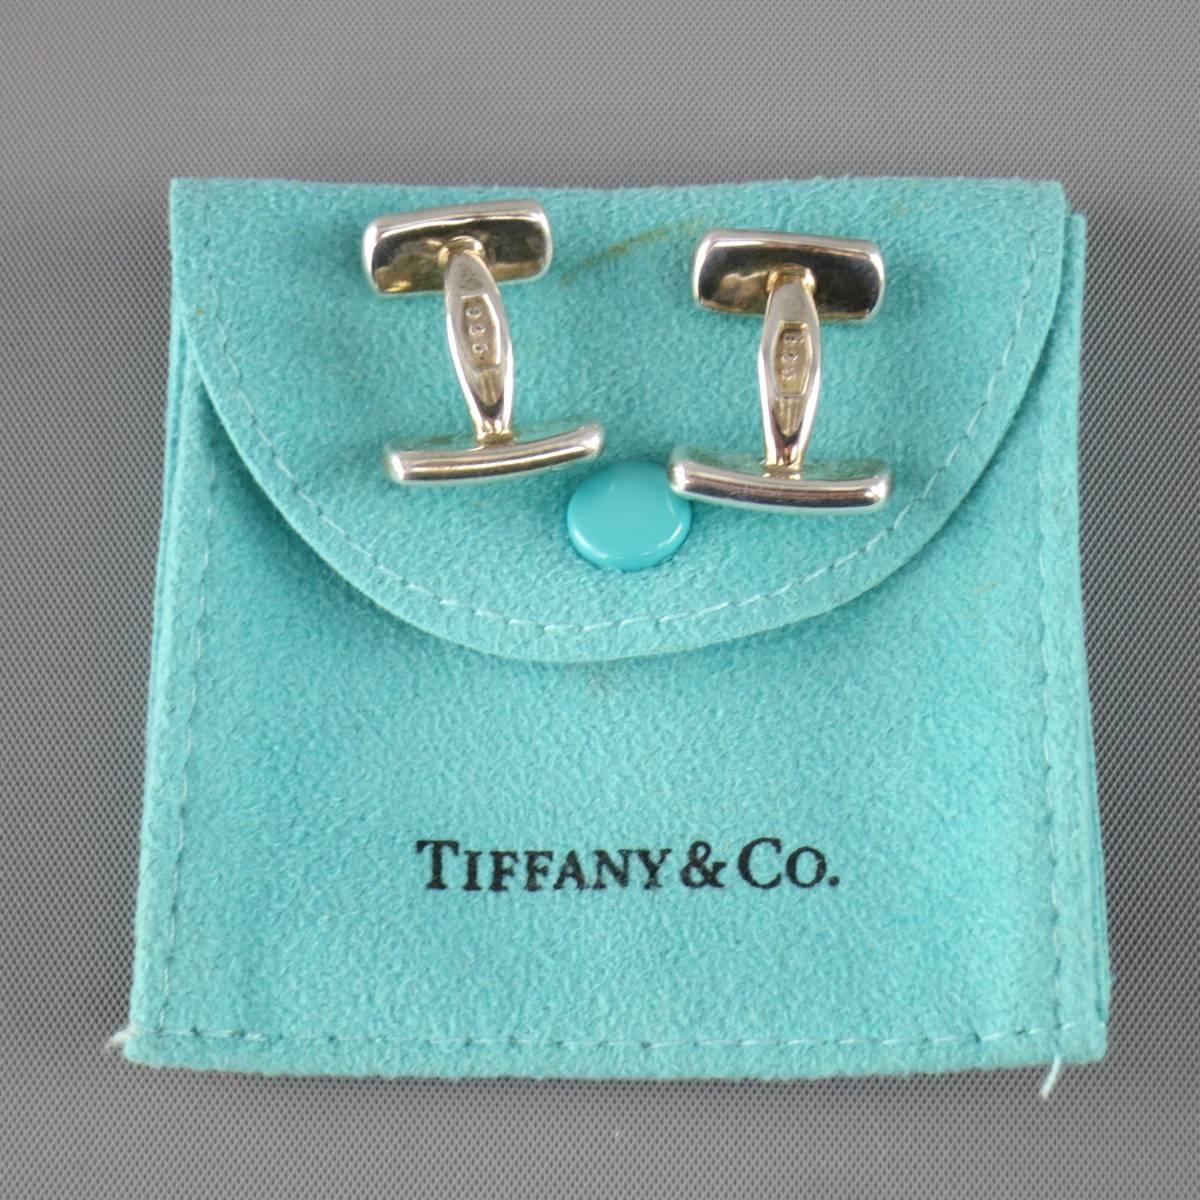 Men's Vintage 1997 TIFFANY & CO. Sterling Silver 1887 Engraved Bar Cuff Links